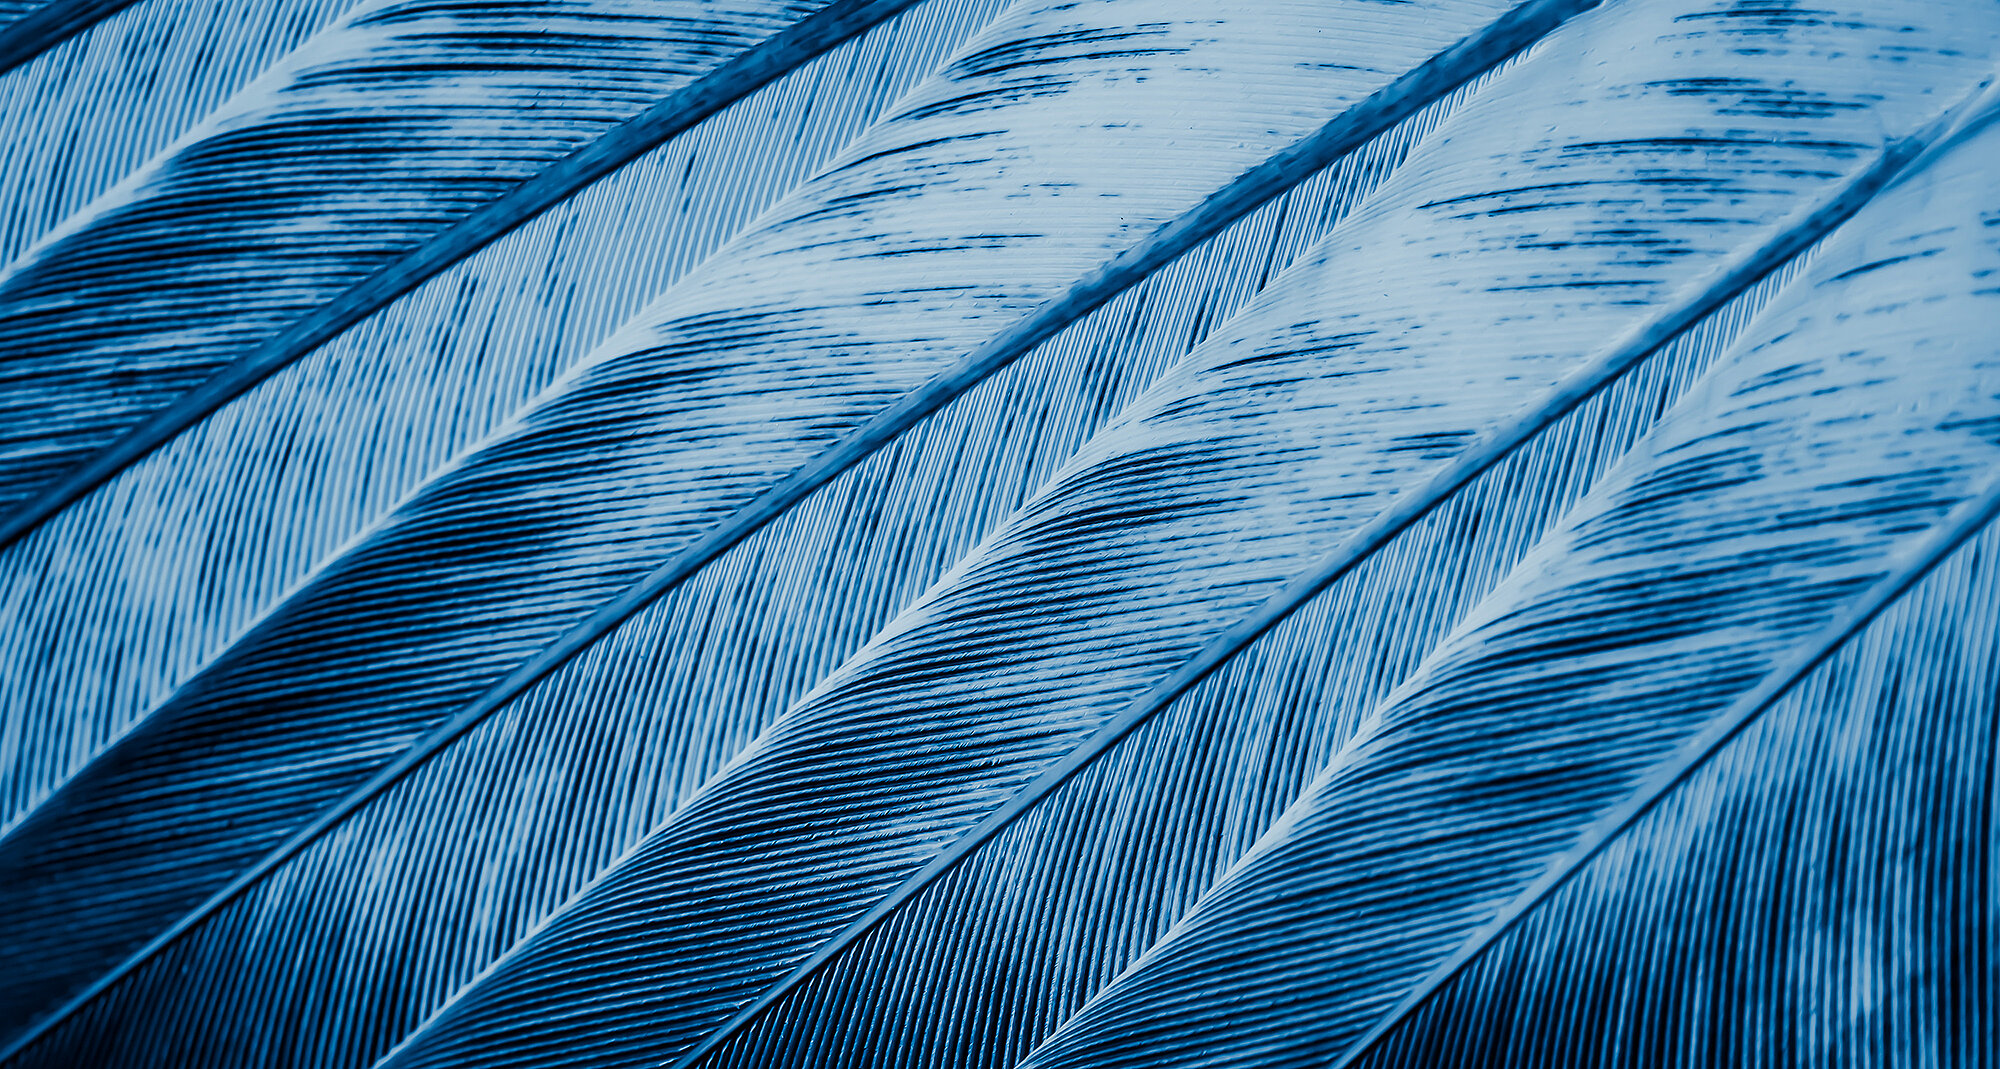 Blue feathers of a pigeon